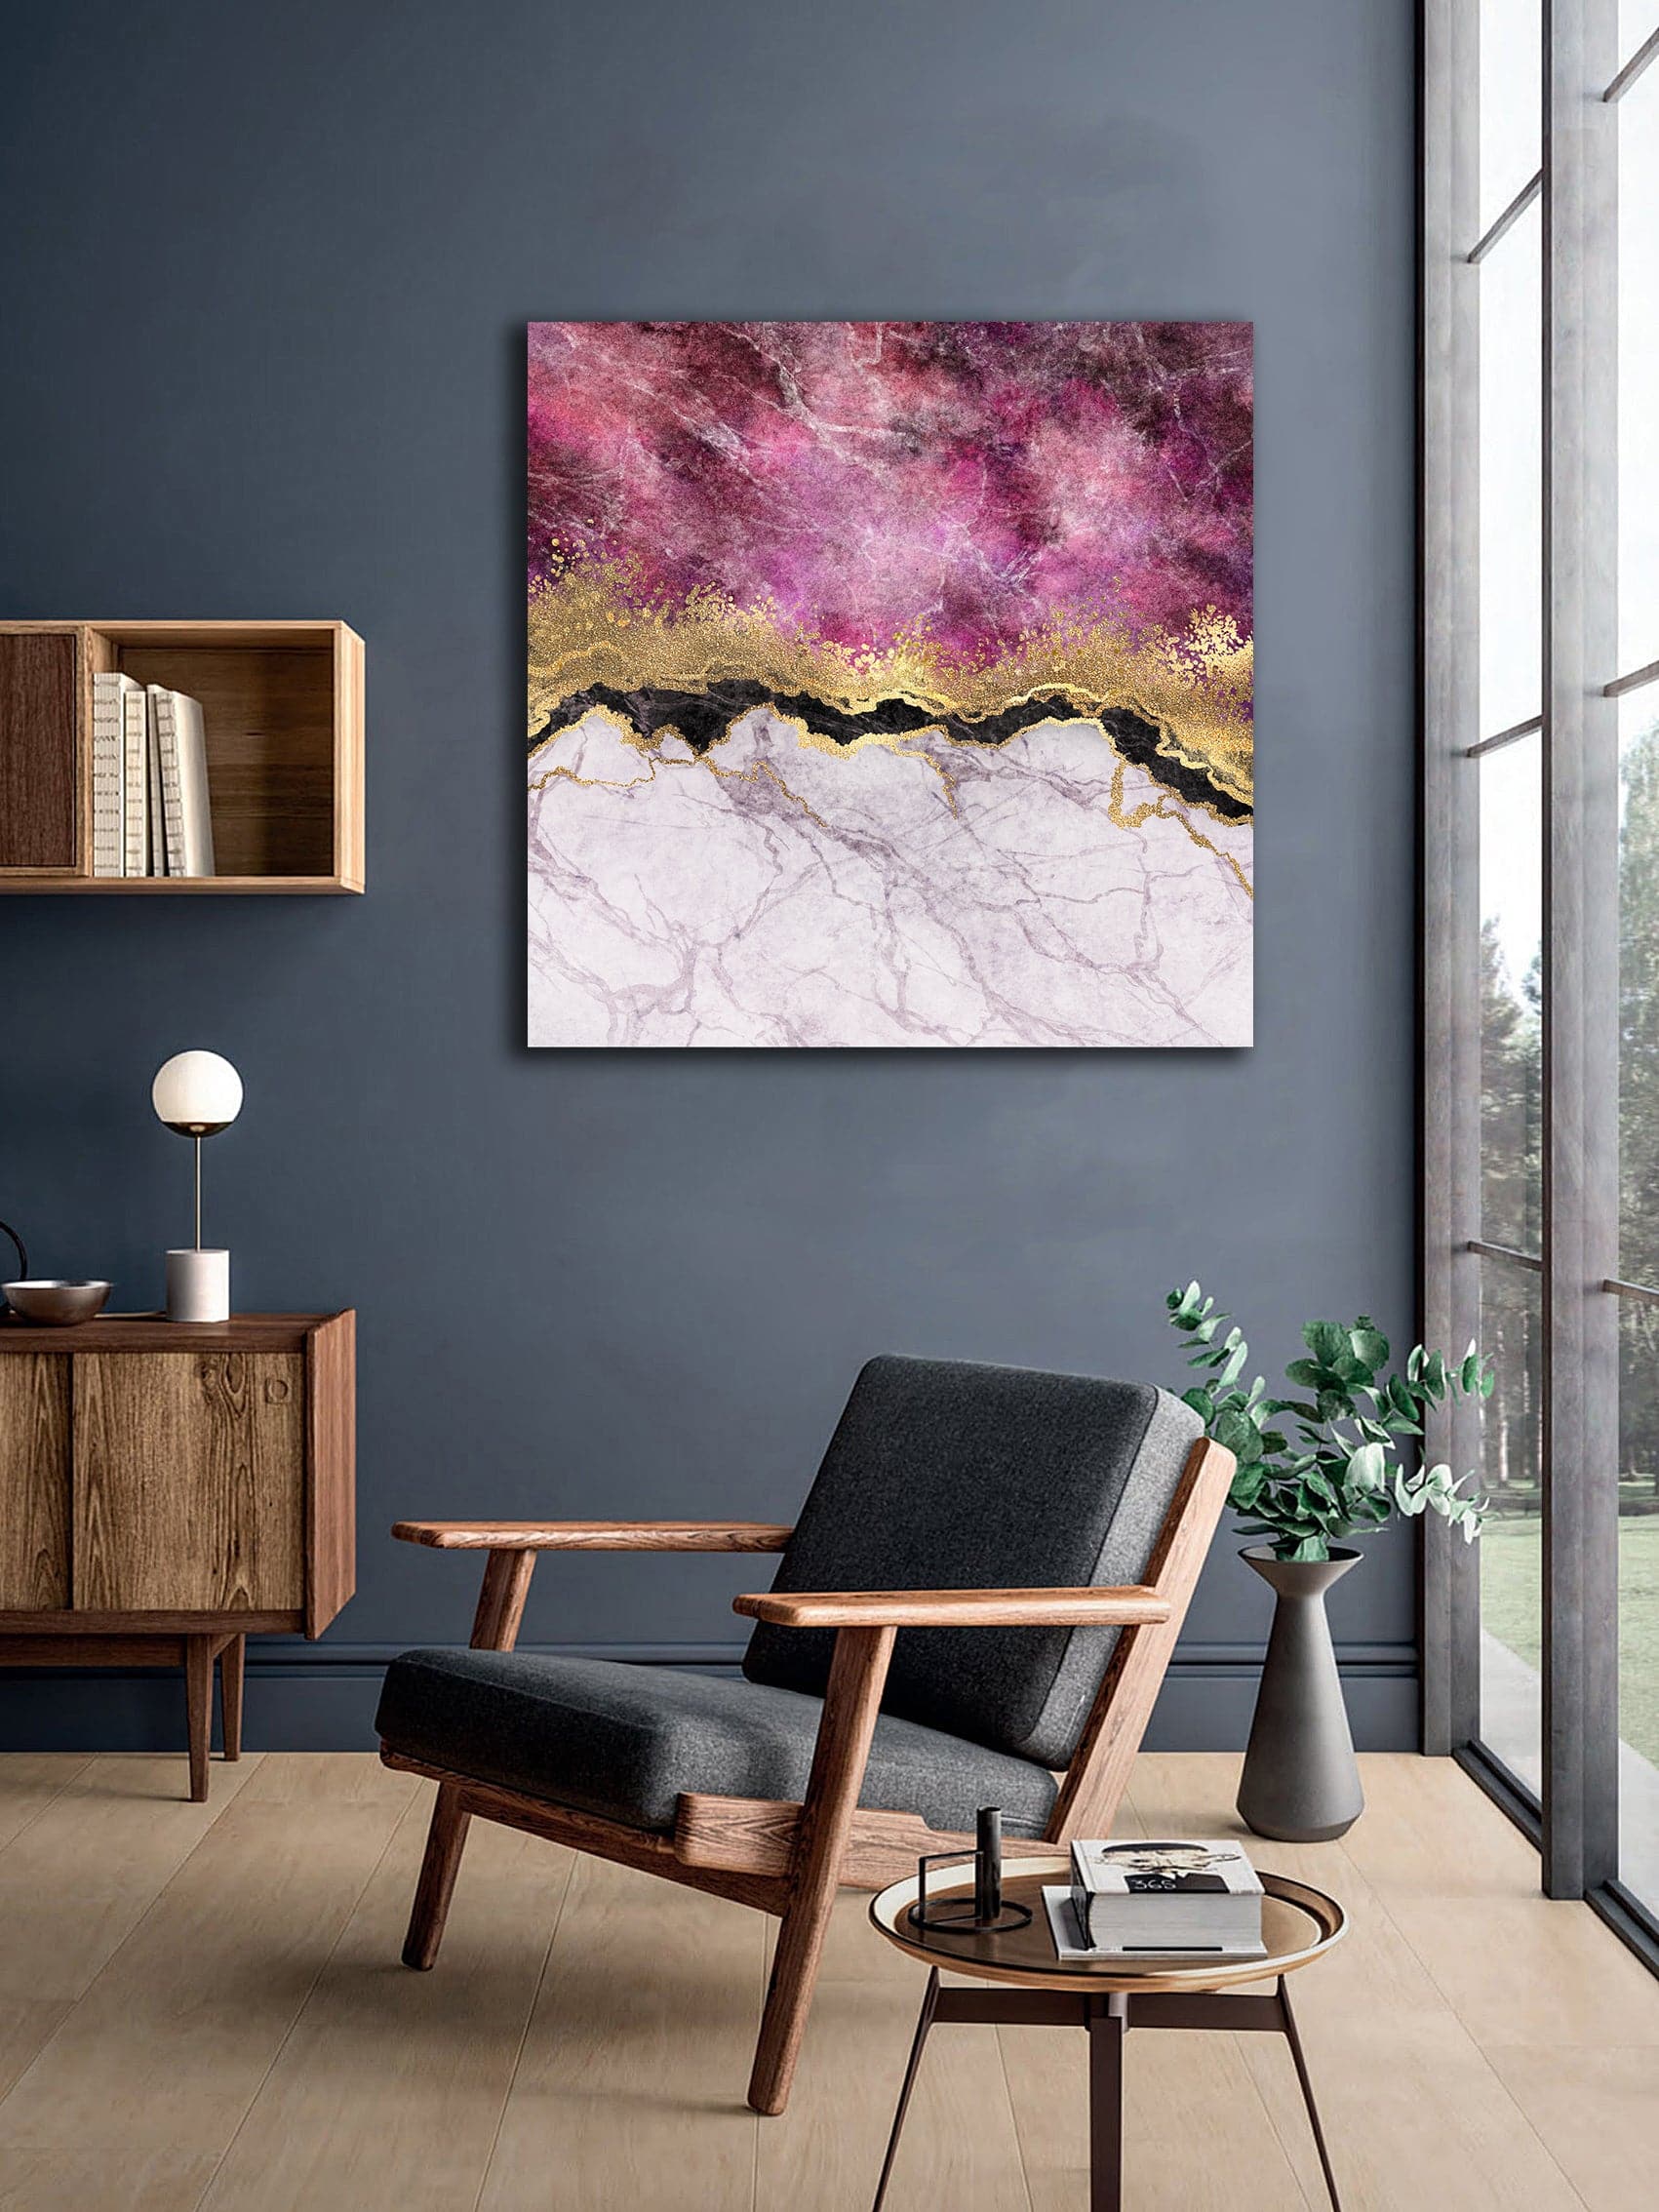 Framed 1 Panel - Abstract - Pink Marble with Veins Stone Texture, Gold Foil and Glitter